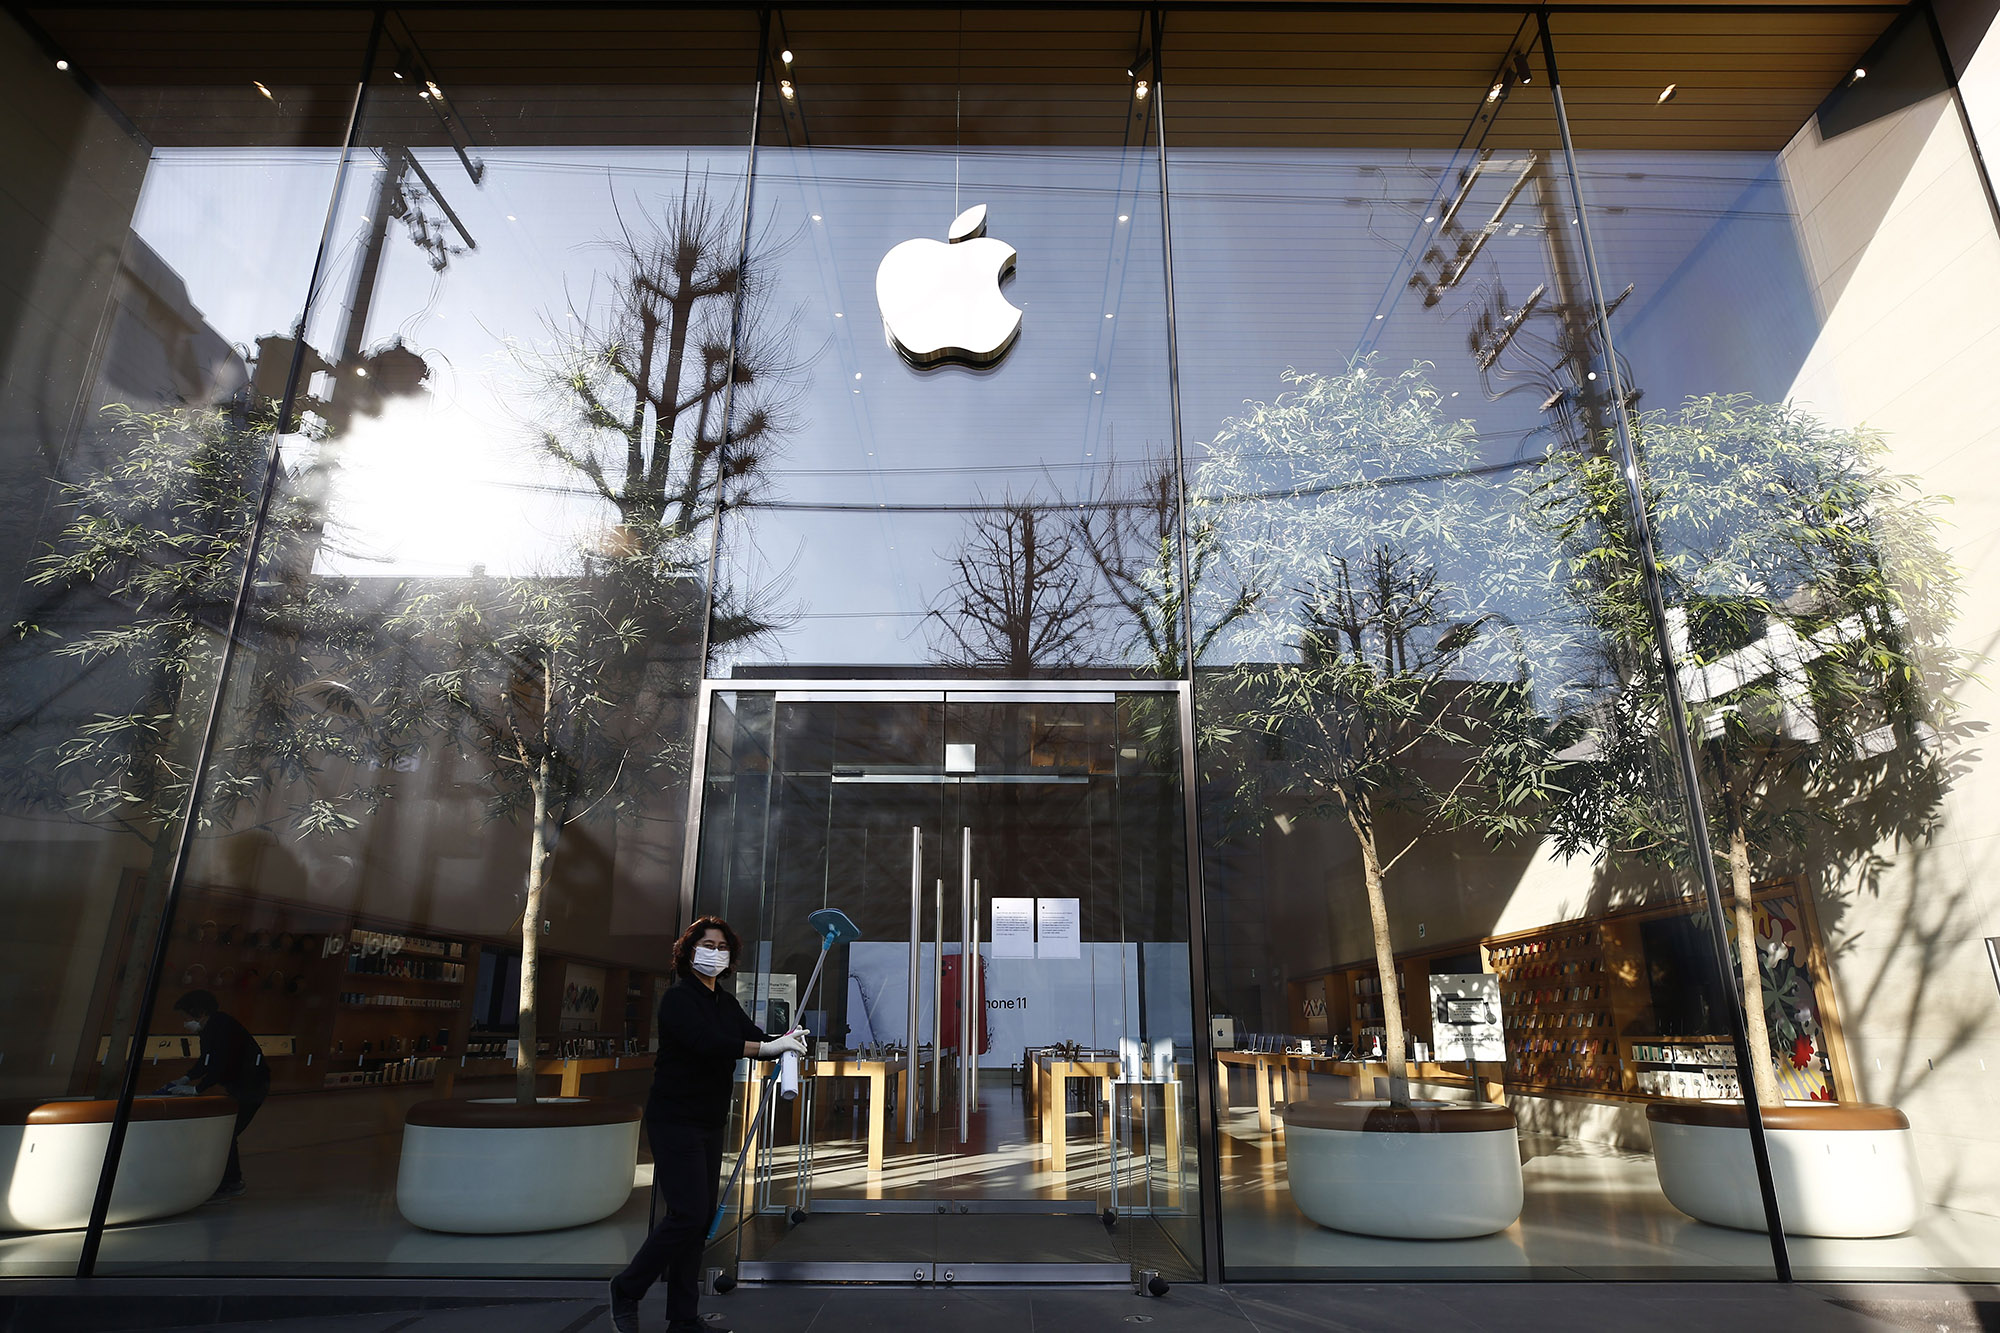 Apple plans to reopen nearly 100 stores in the U.S. this week